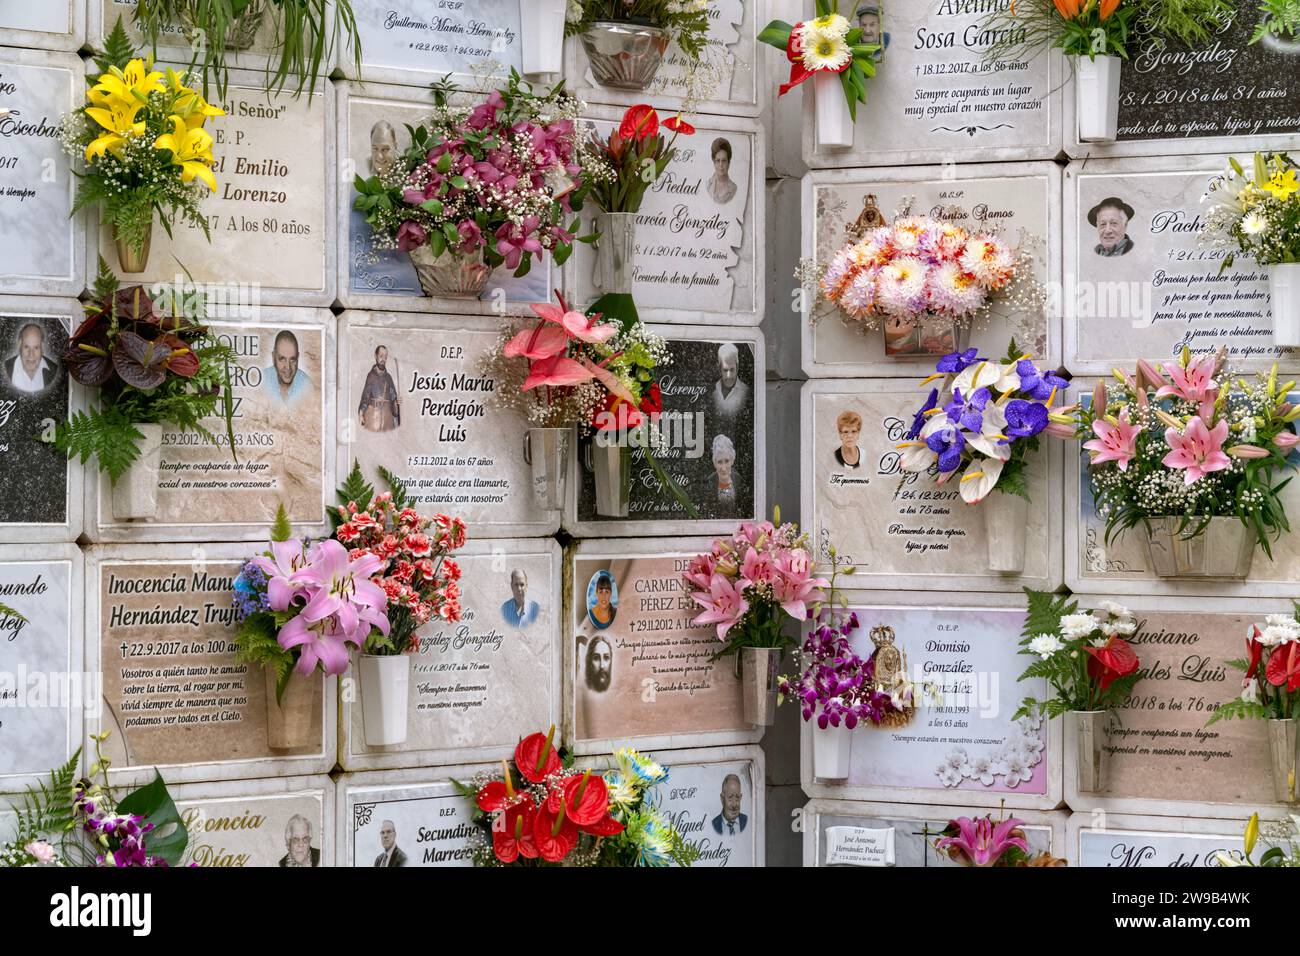 Municpal Cemetery, La Orotava, Tenerife showing close up of marble gravestones/memorials to the deceased adorned with fresh flowers. Stock Photo